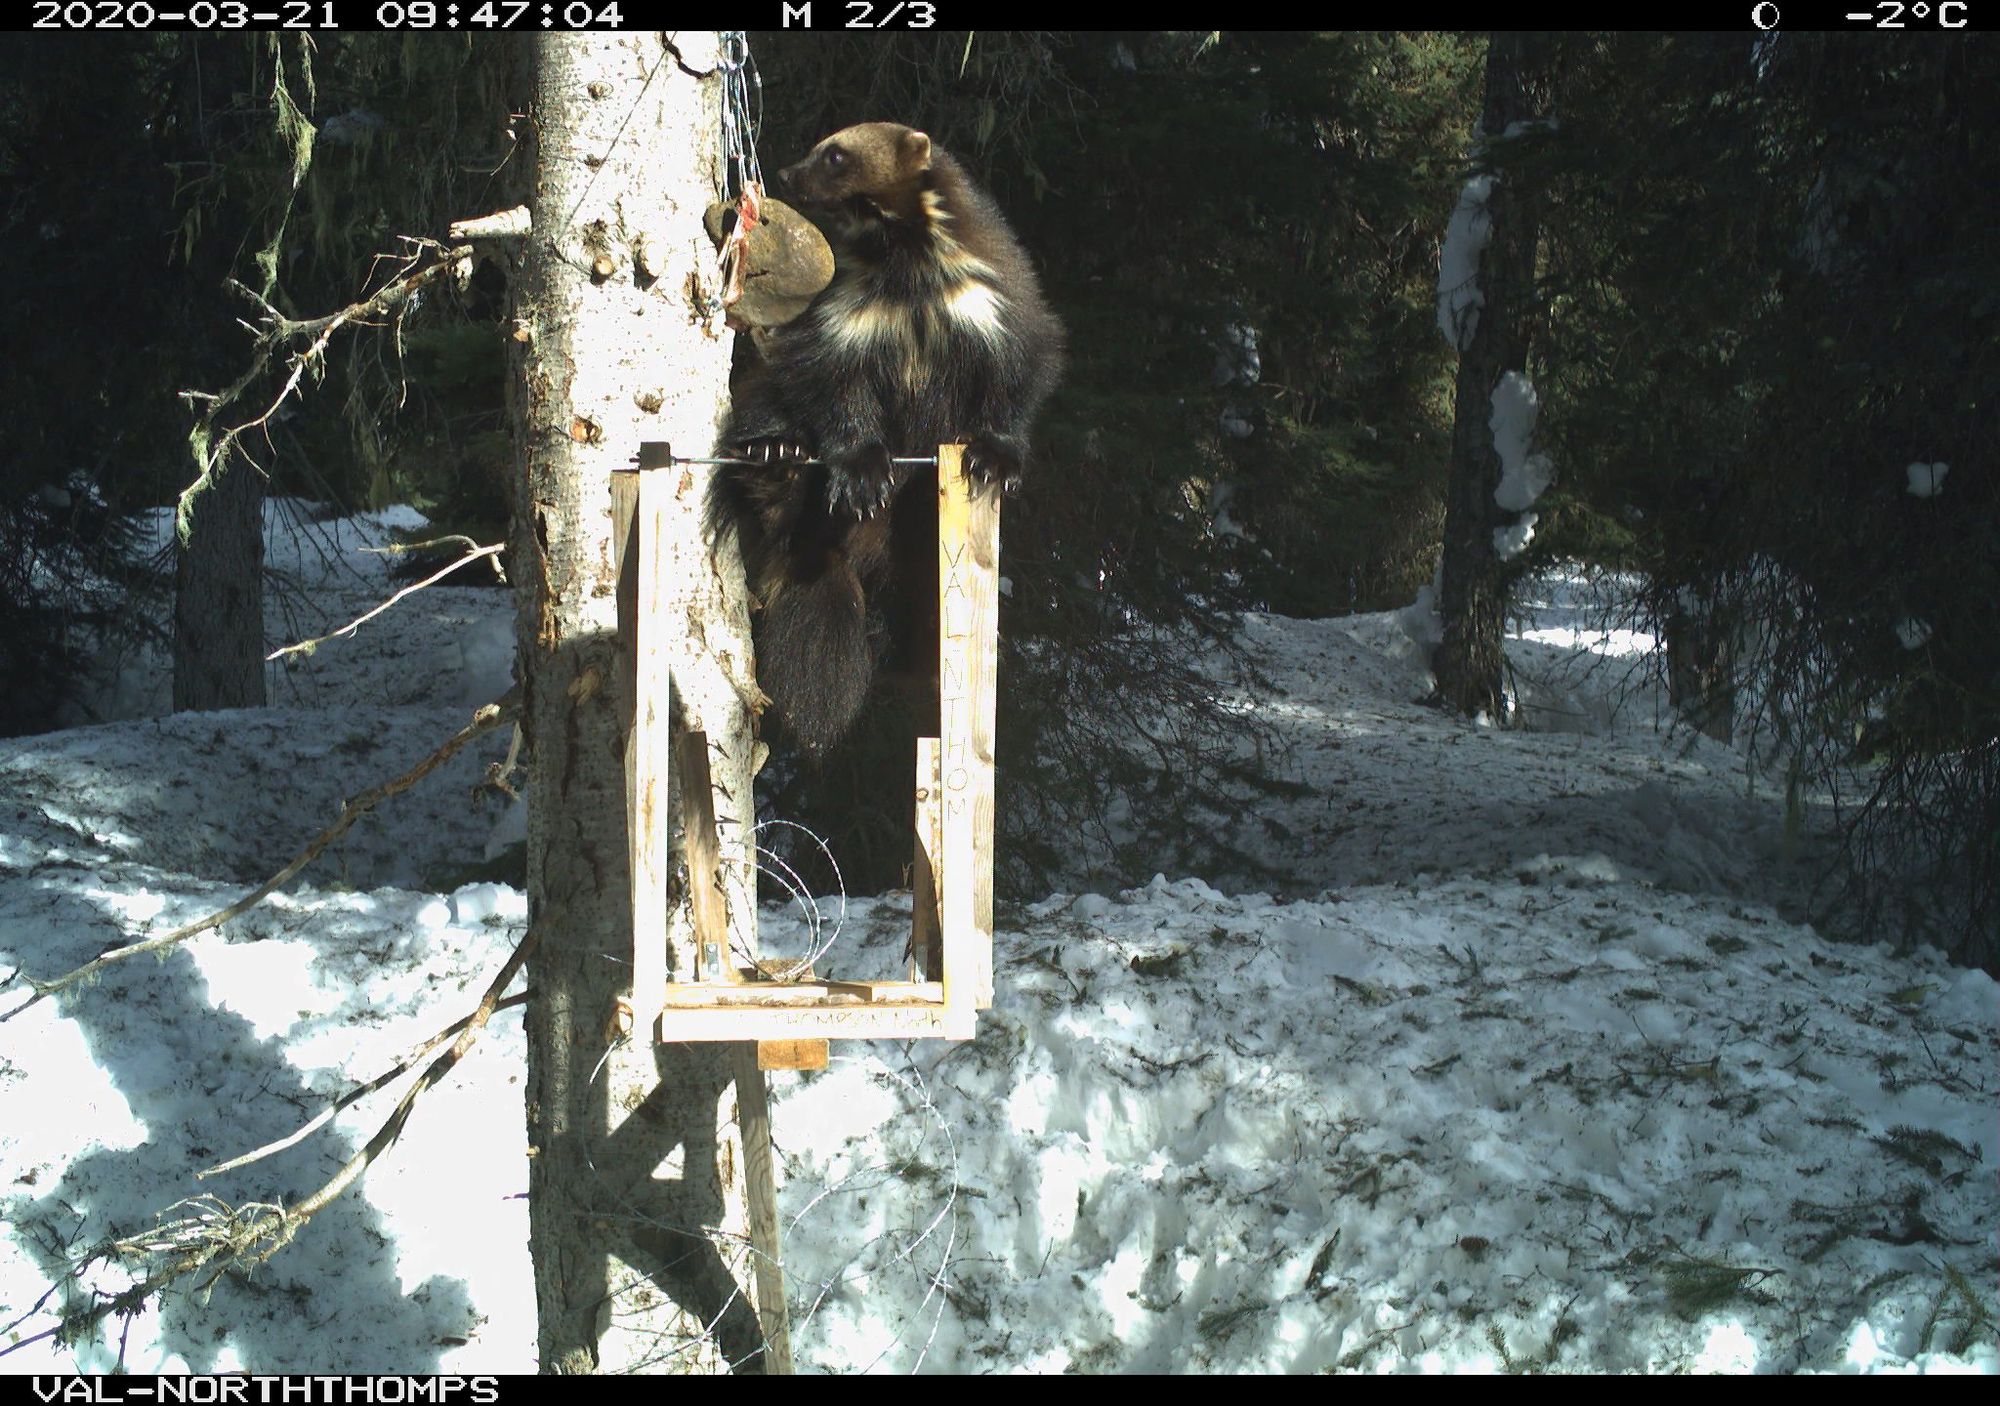 A camera trap photo of a wolverine in a tree, with snow on the ground